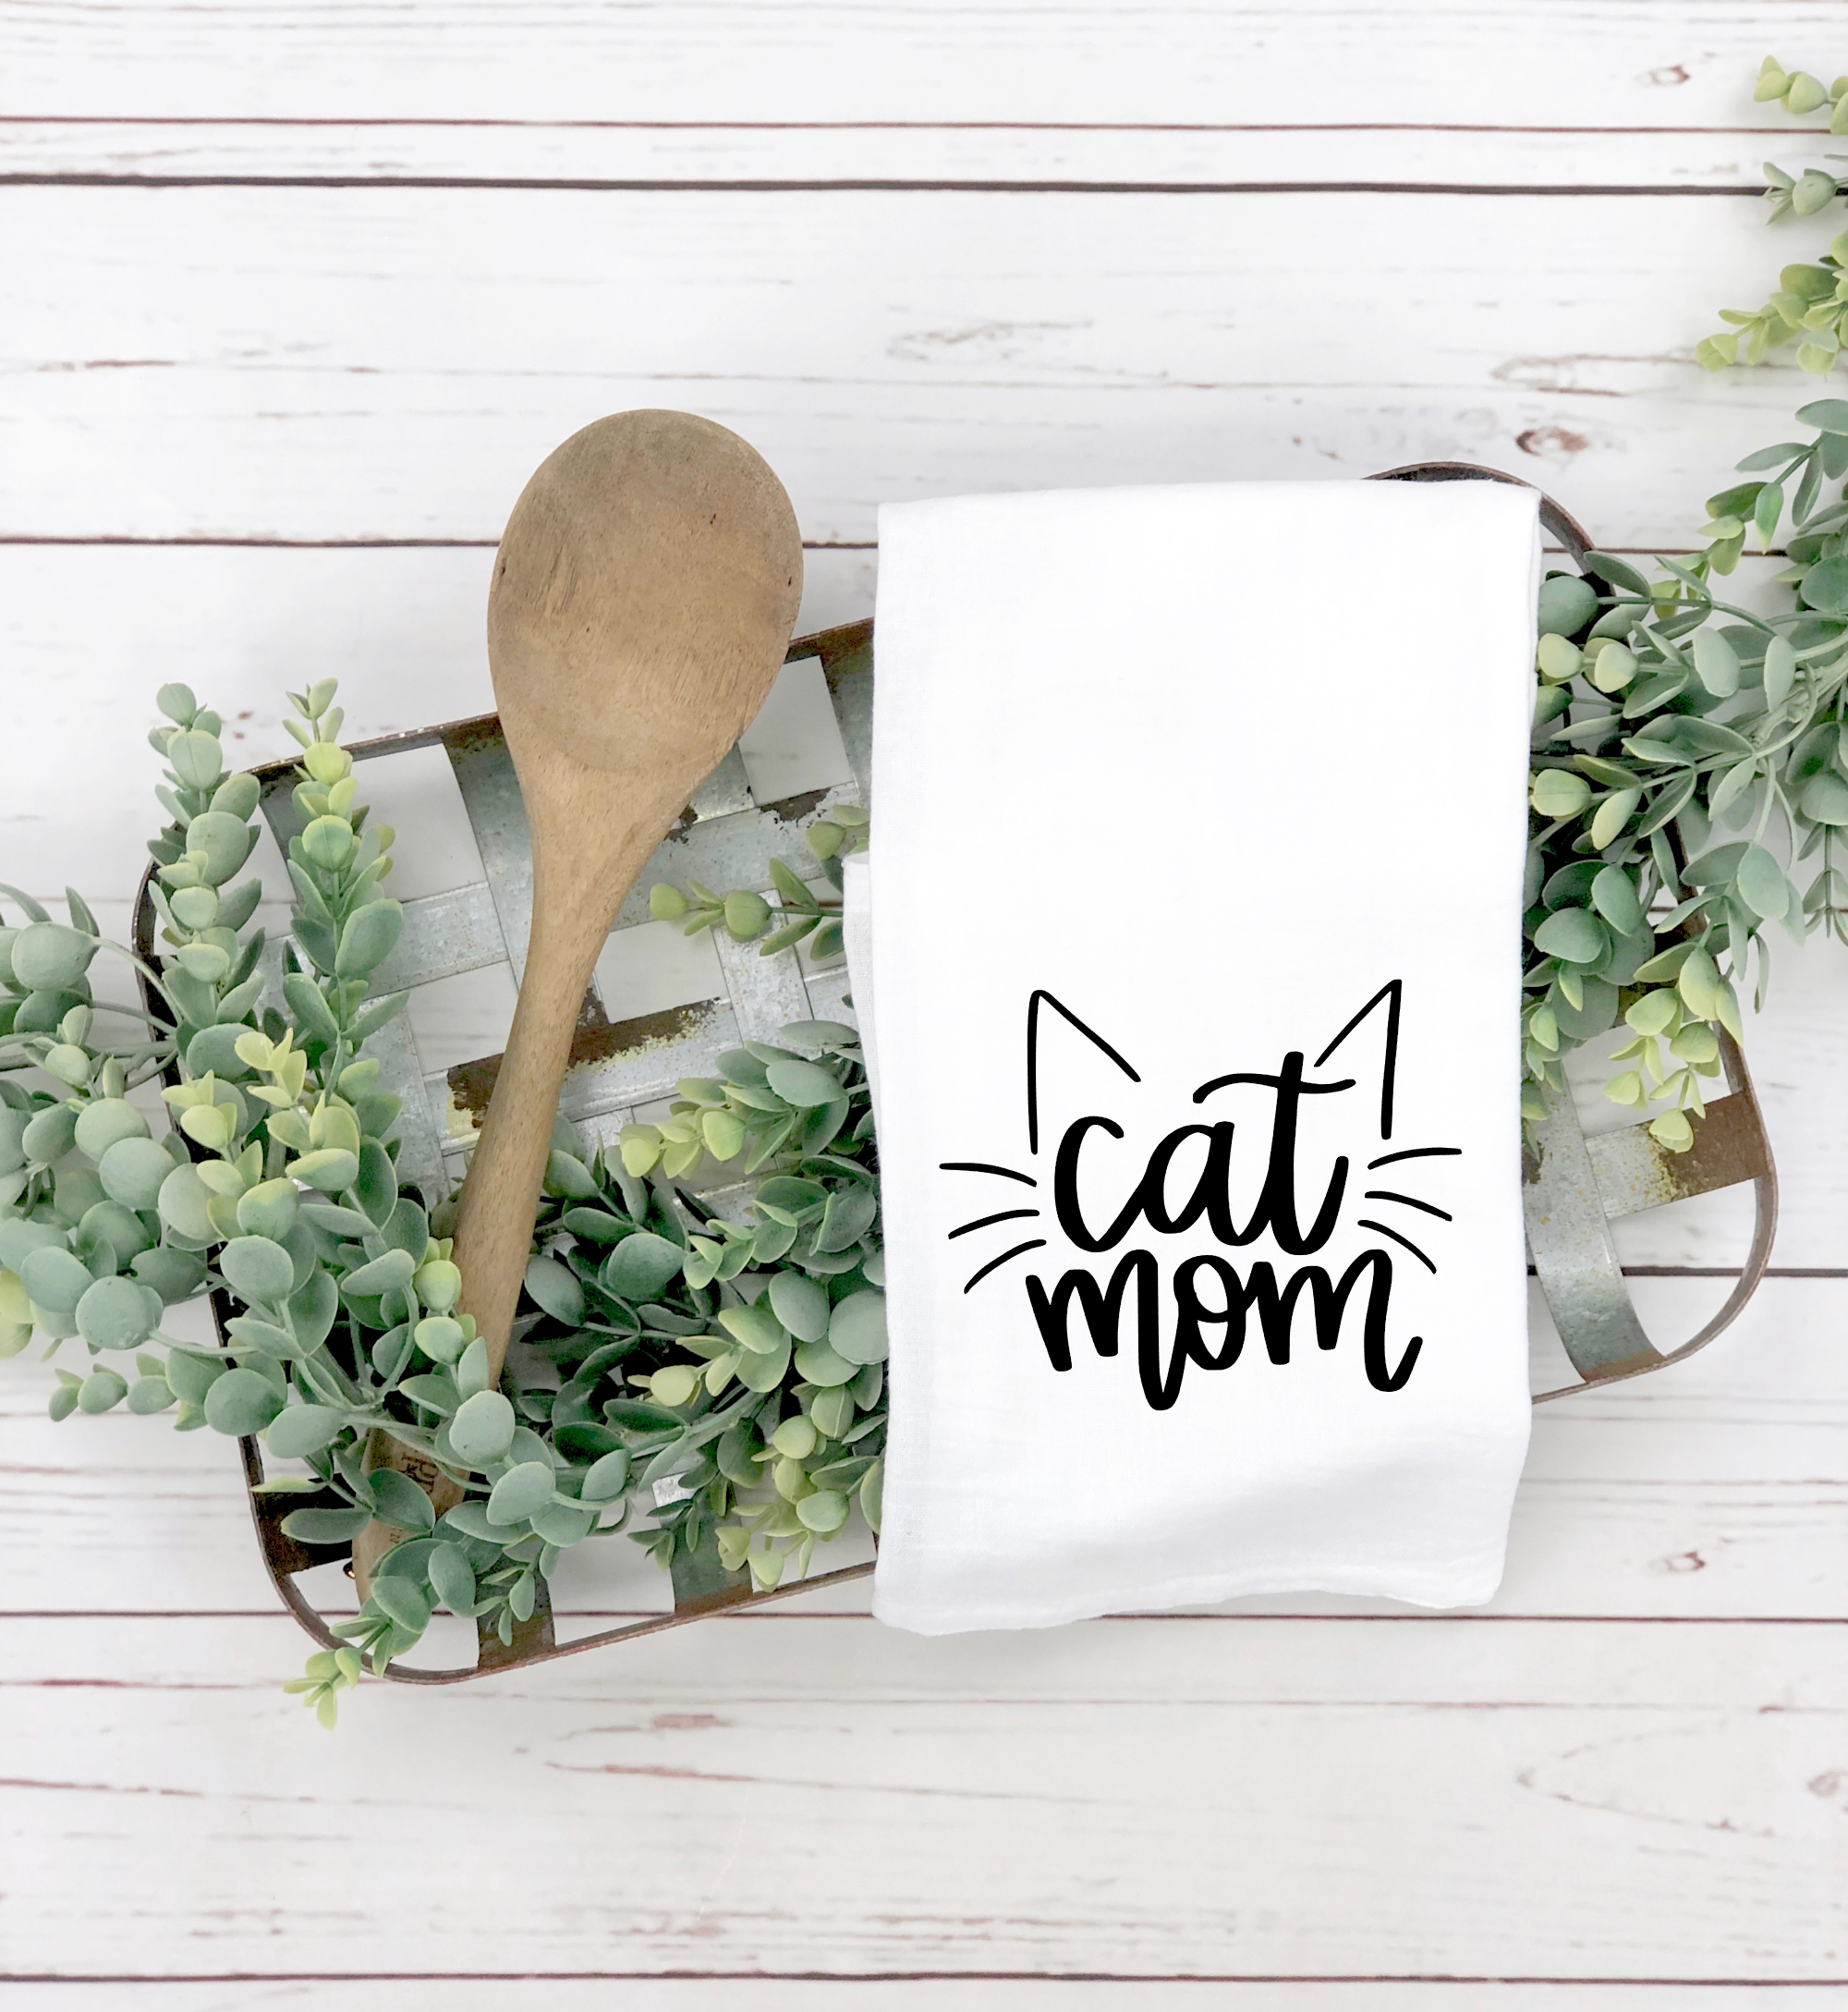 Looking for the purr-fect gift for a cat mom? The Cat Mom Tea Towel is just what you need! Ideal for adding a touch of feline charm to any kitchen, this tea towel is adorable.